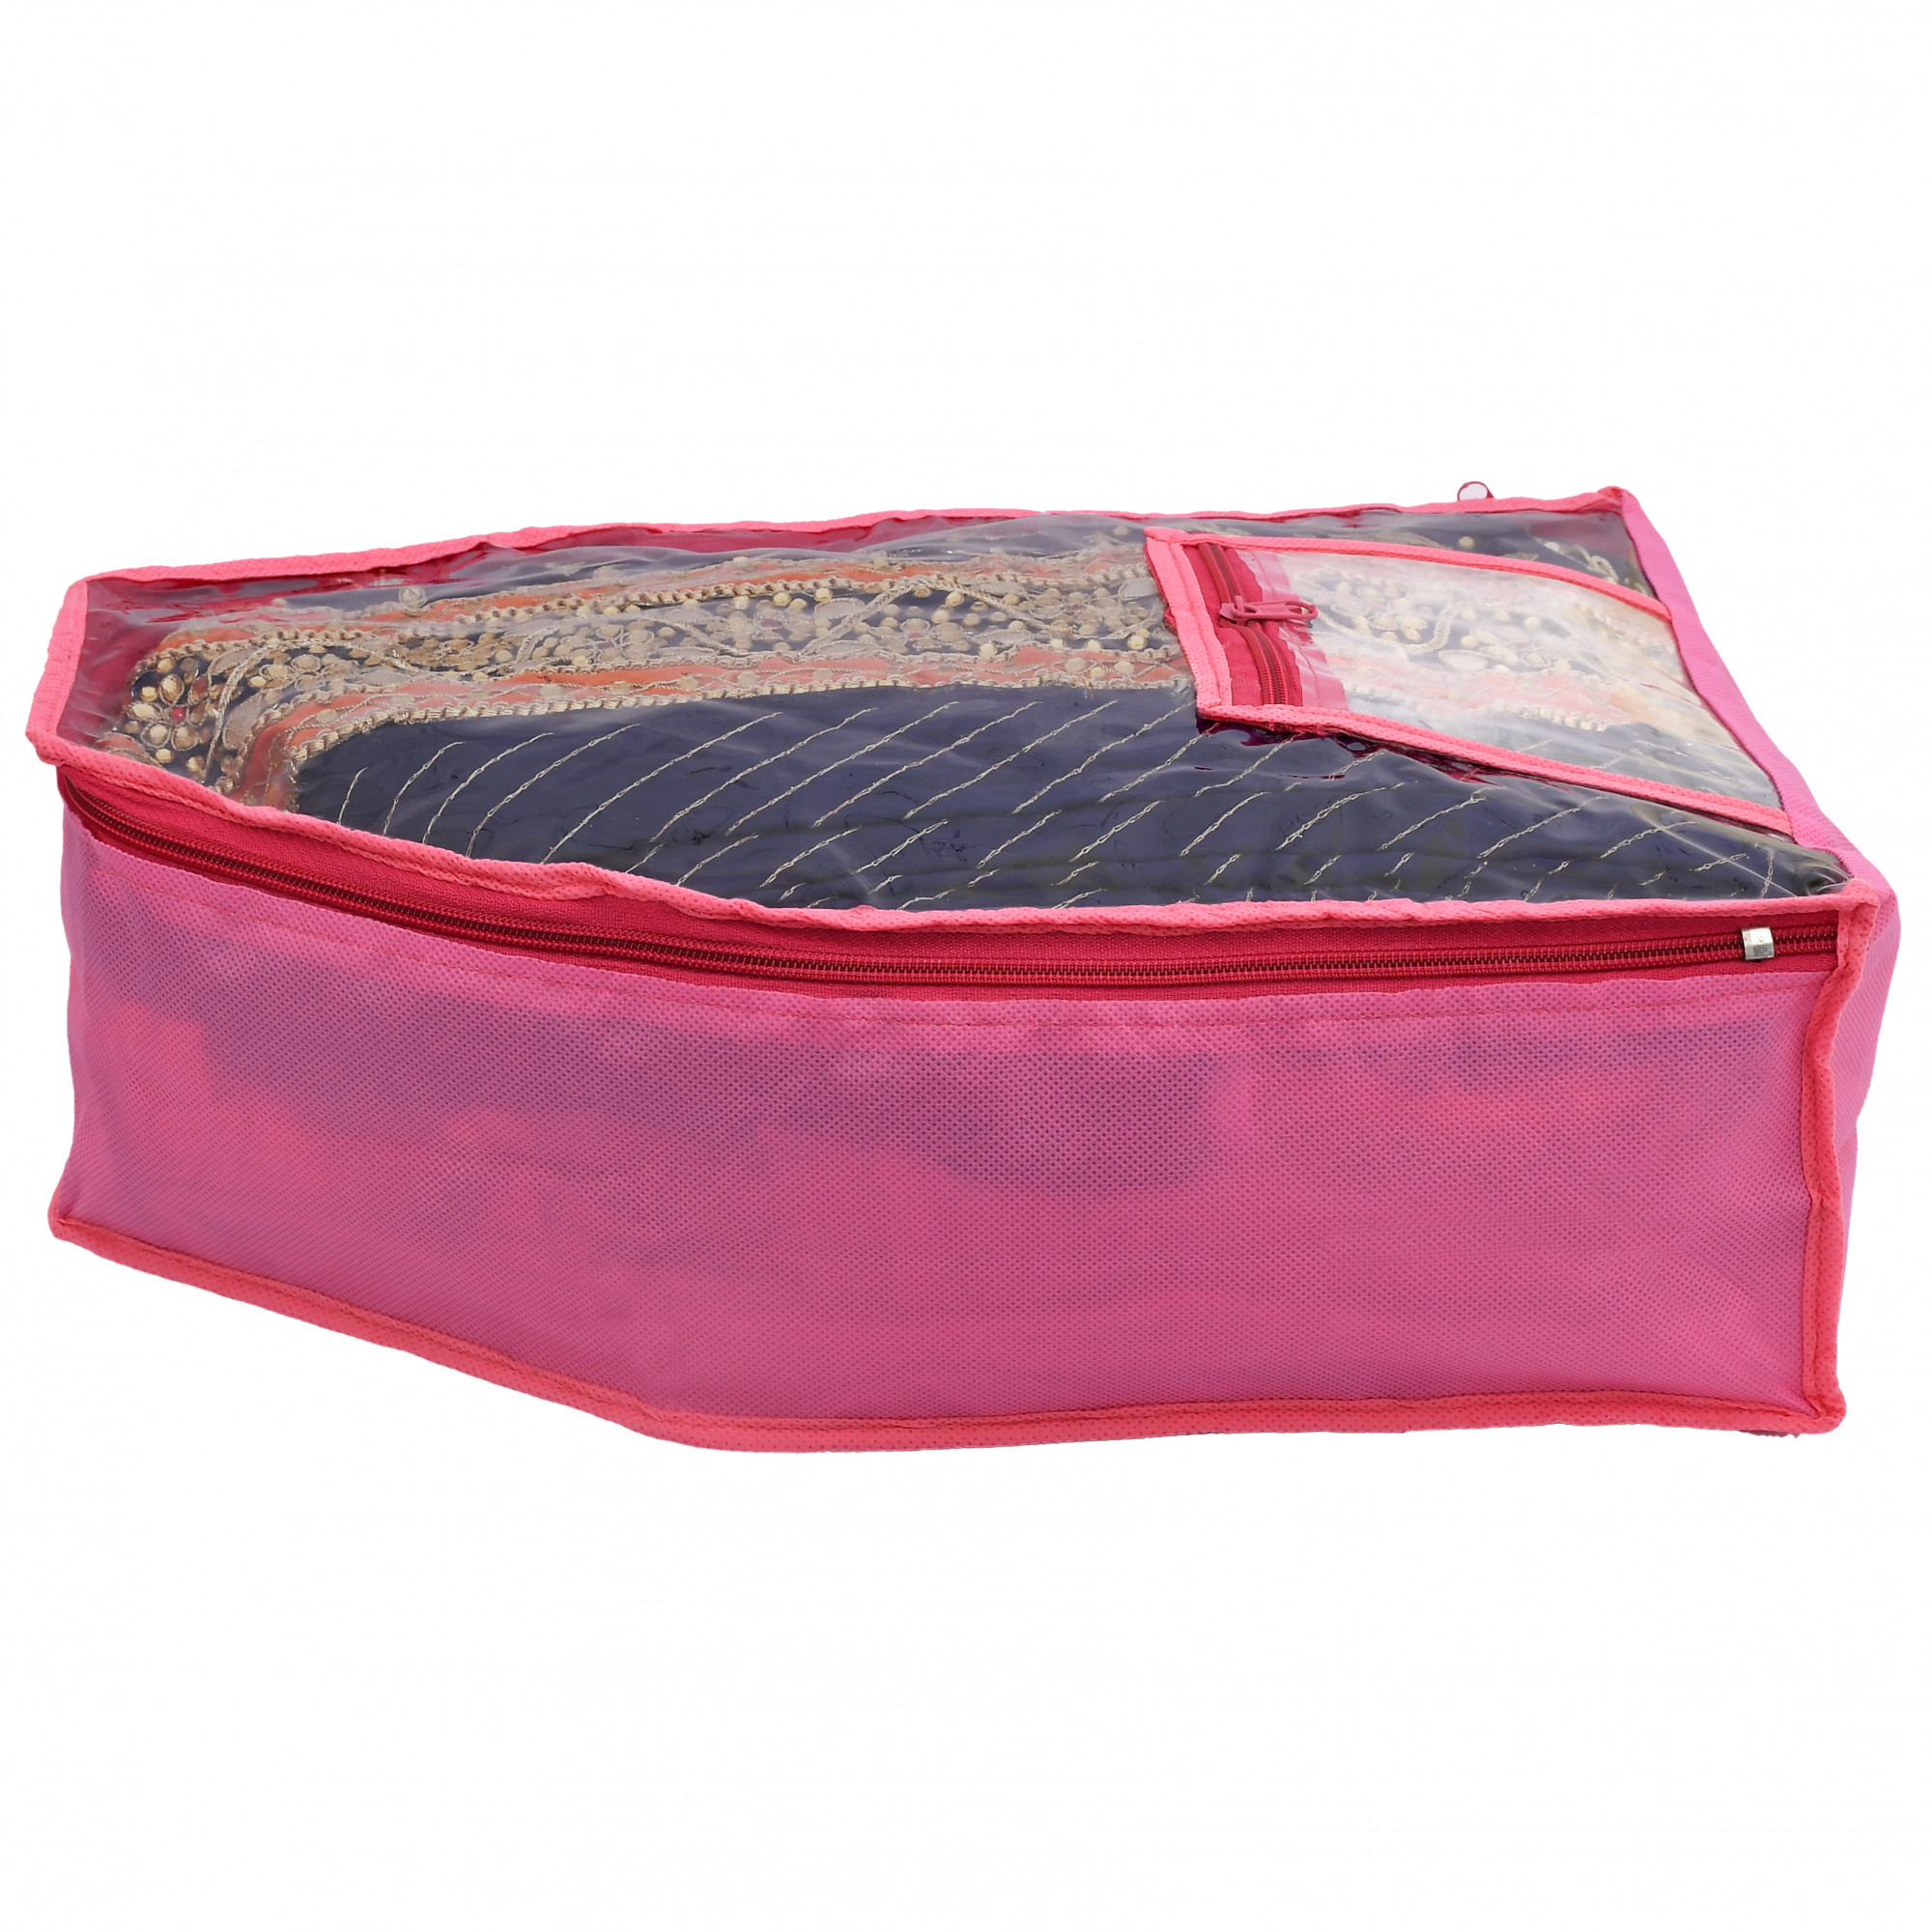 Kuber Industries Non Woven Saree Cover/Cloth Wardrobe Organizer and Blouse Cover Combo Set (Pink)